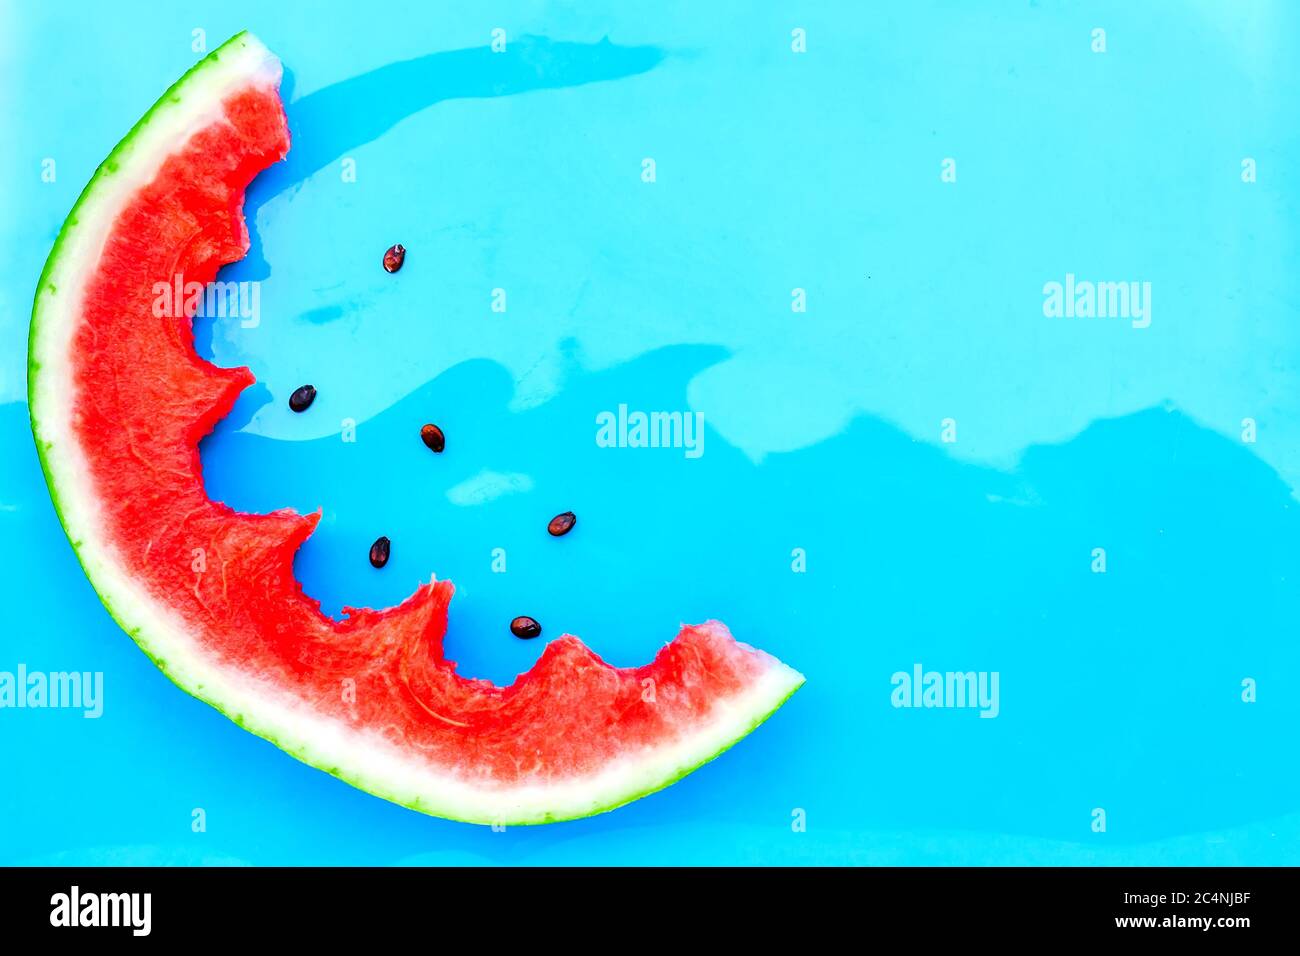 Summer creative watermelon layout. Bitten slice of fresh jucy watermelon on light blue background. Top view. Copy space Stock Photo